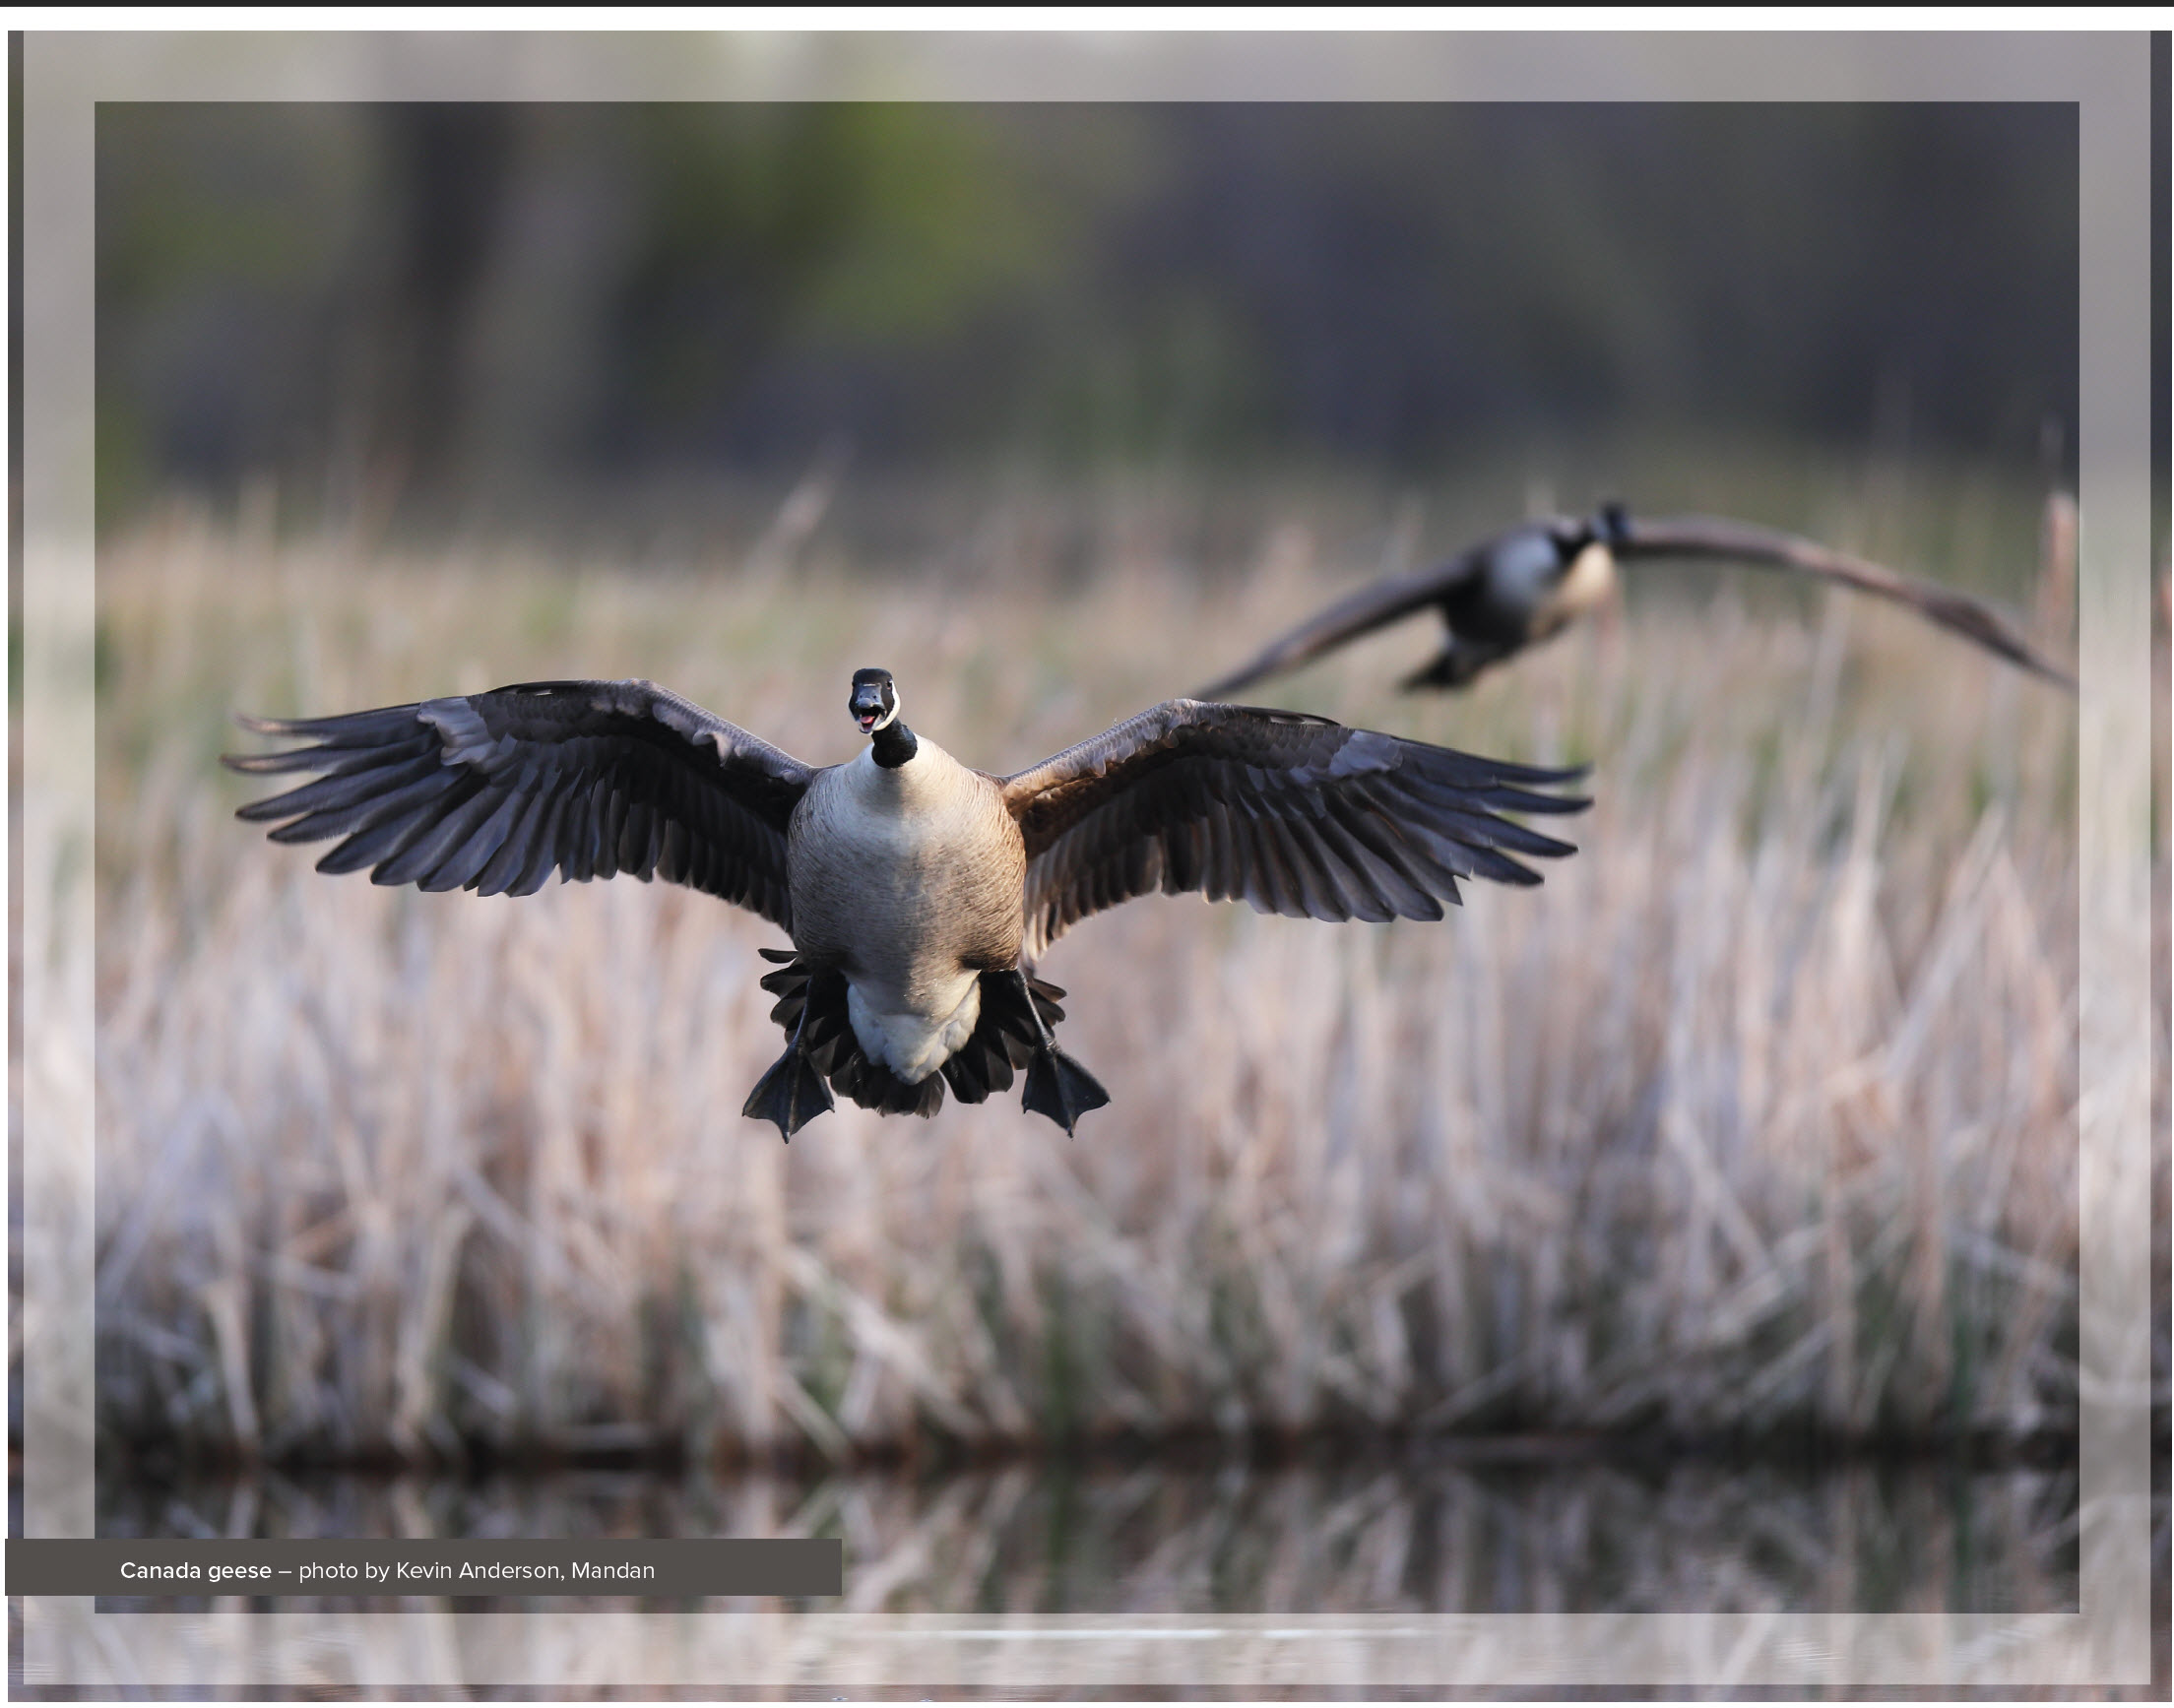 Canada geese taken by Kevin Anderson